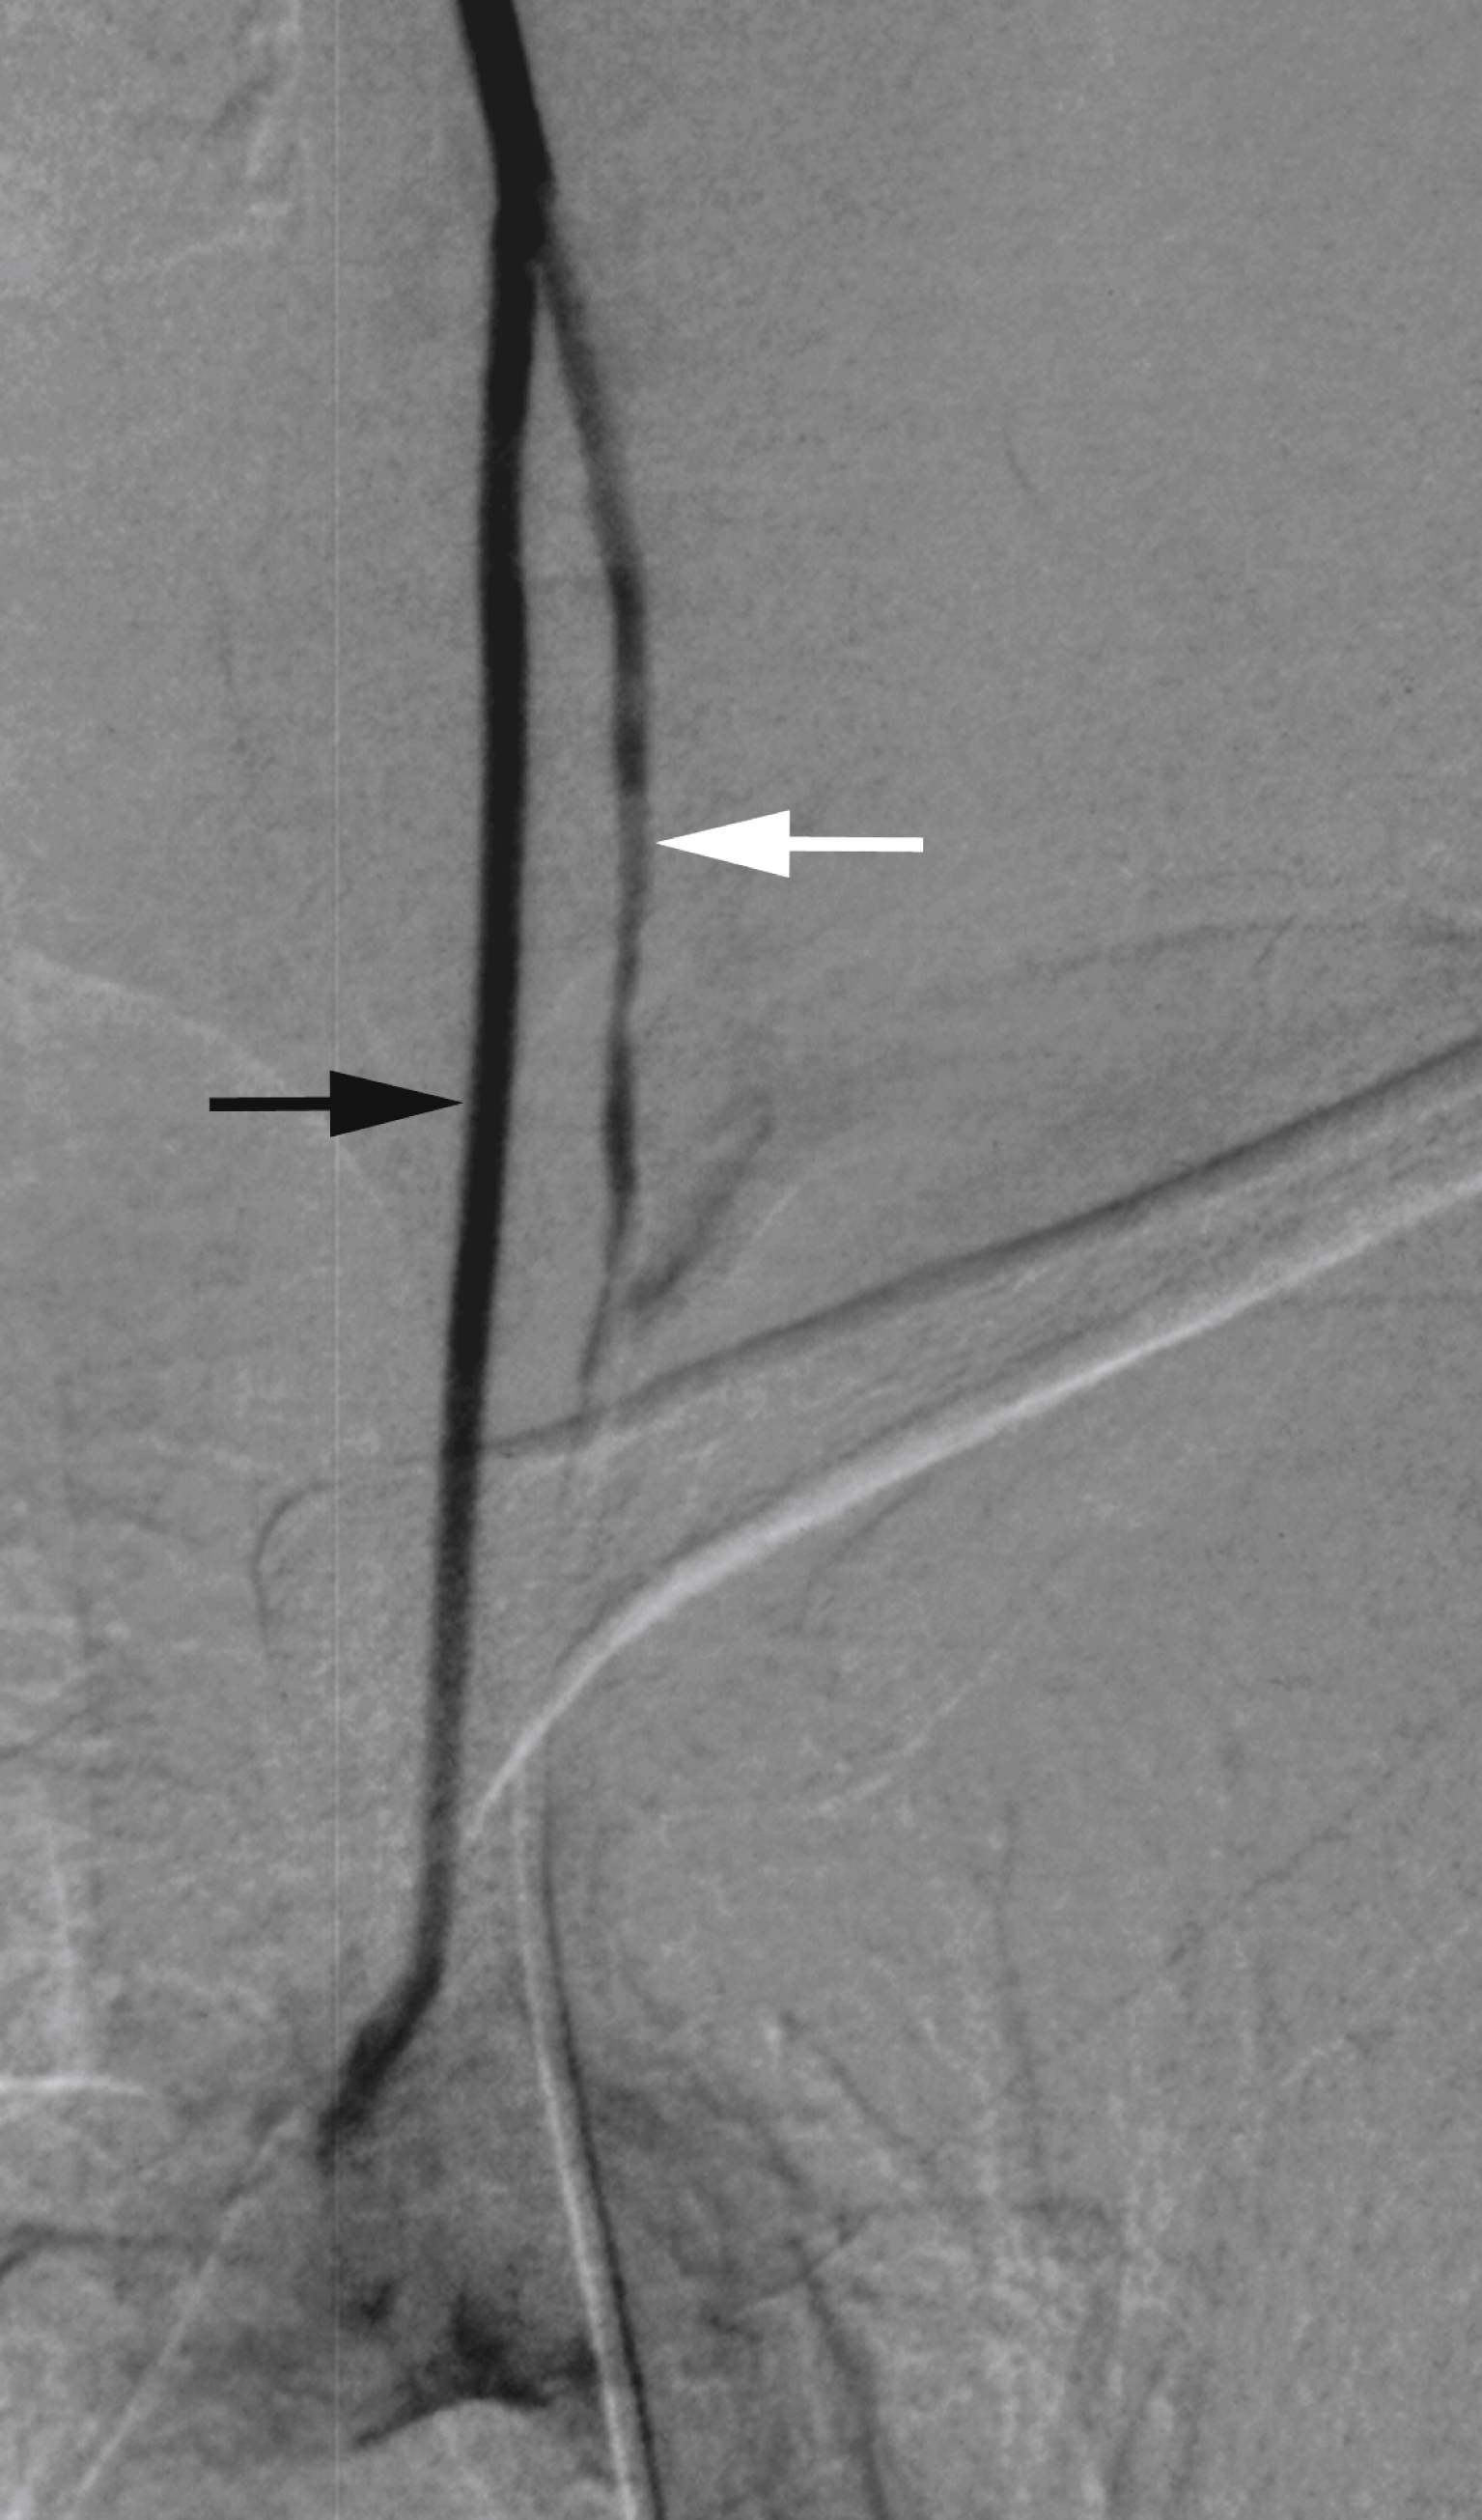 Fig. 56.11, Digital subtraction angiogram, left vertebral artery (VA) injection, anteroposterior view. Selective injection of left VA ( white arrow ) shows a slightly irregular artery that connects with a second VA root ( black arrow ) to form definitive VA. Second root, which arises directly from aortic arch, is opacified retrogradely.